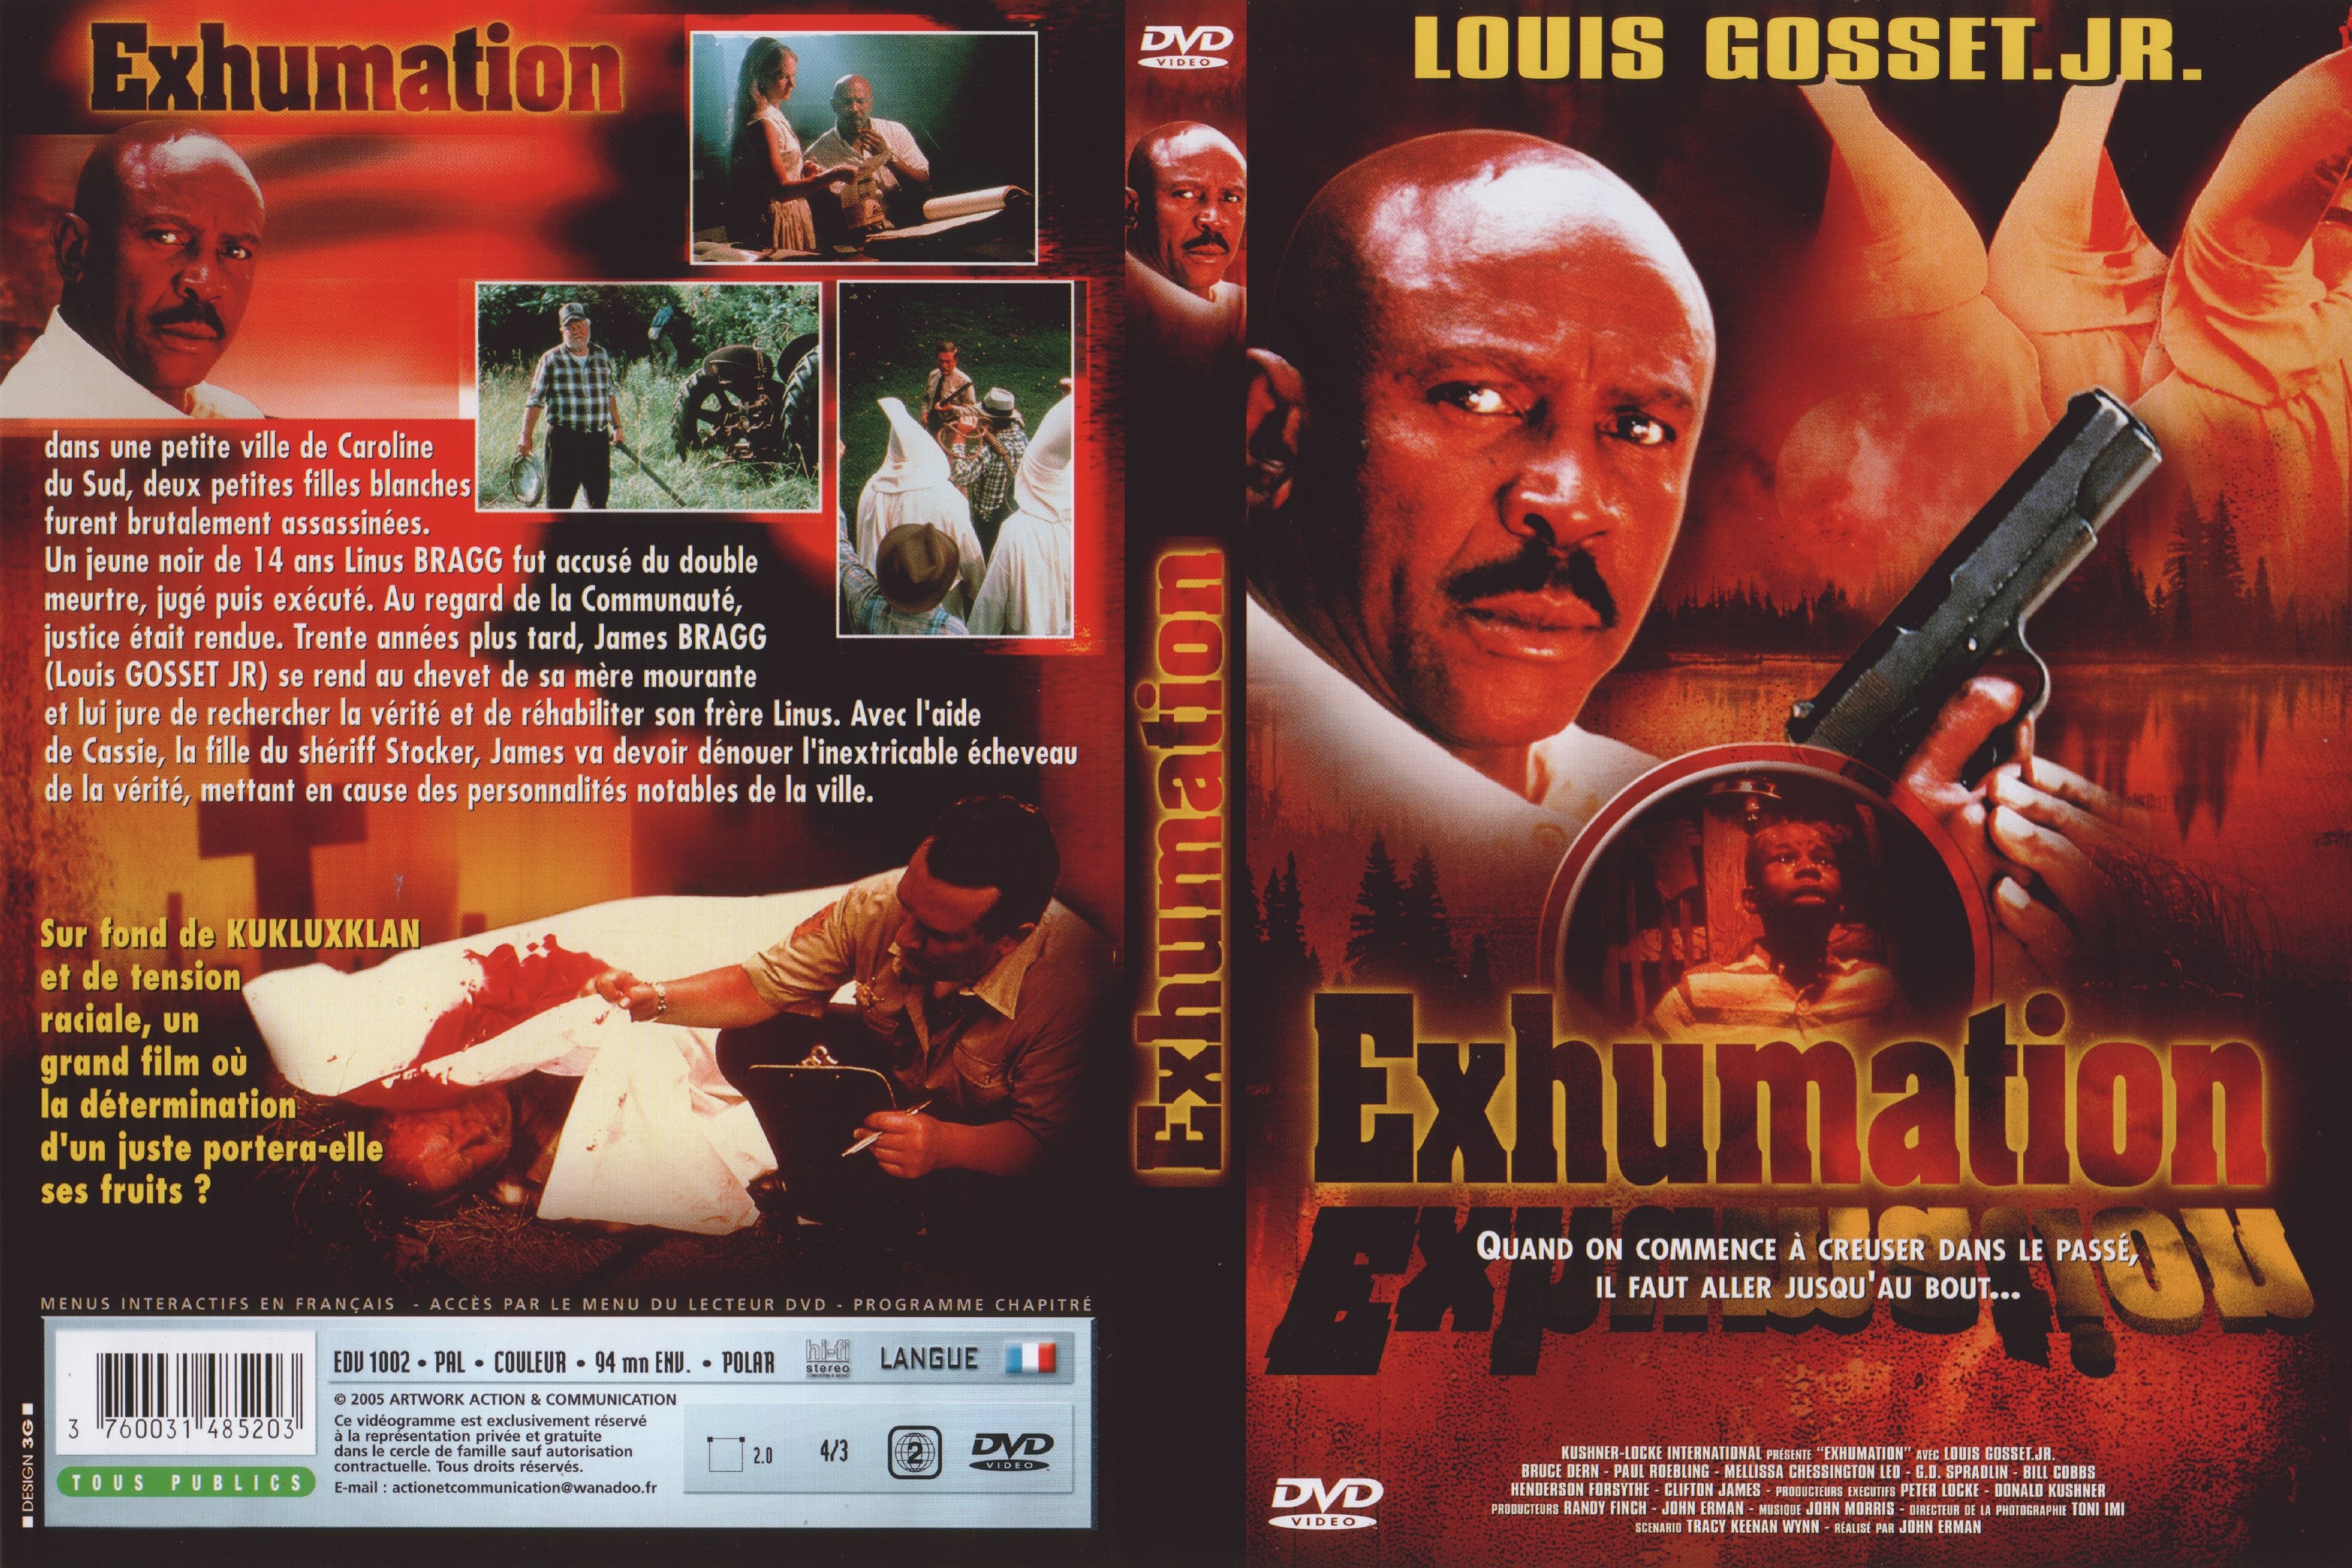 Jaquette DVD Exhumation